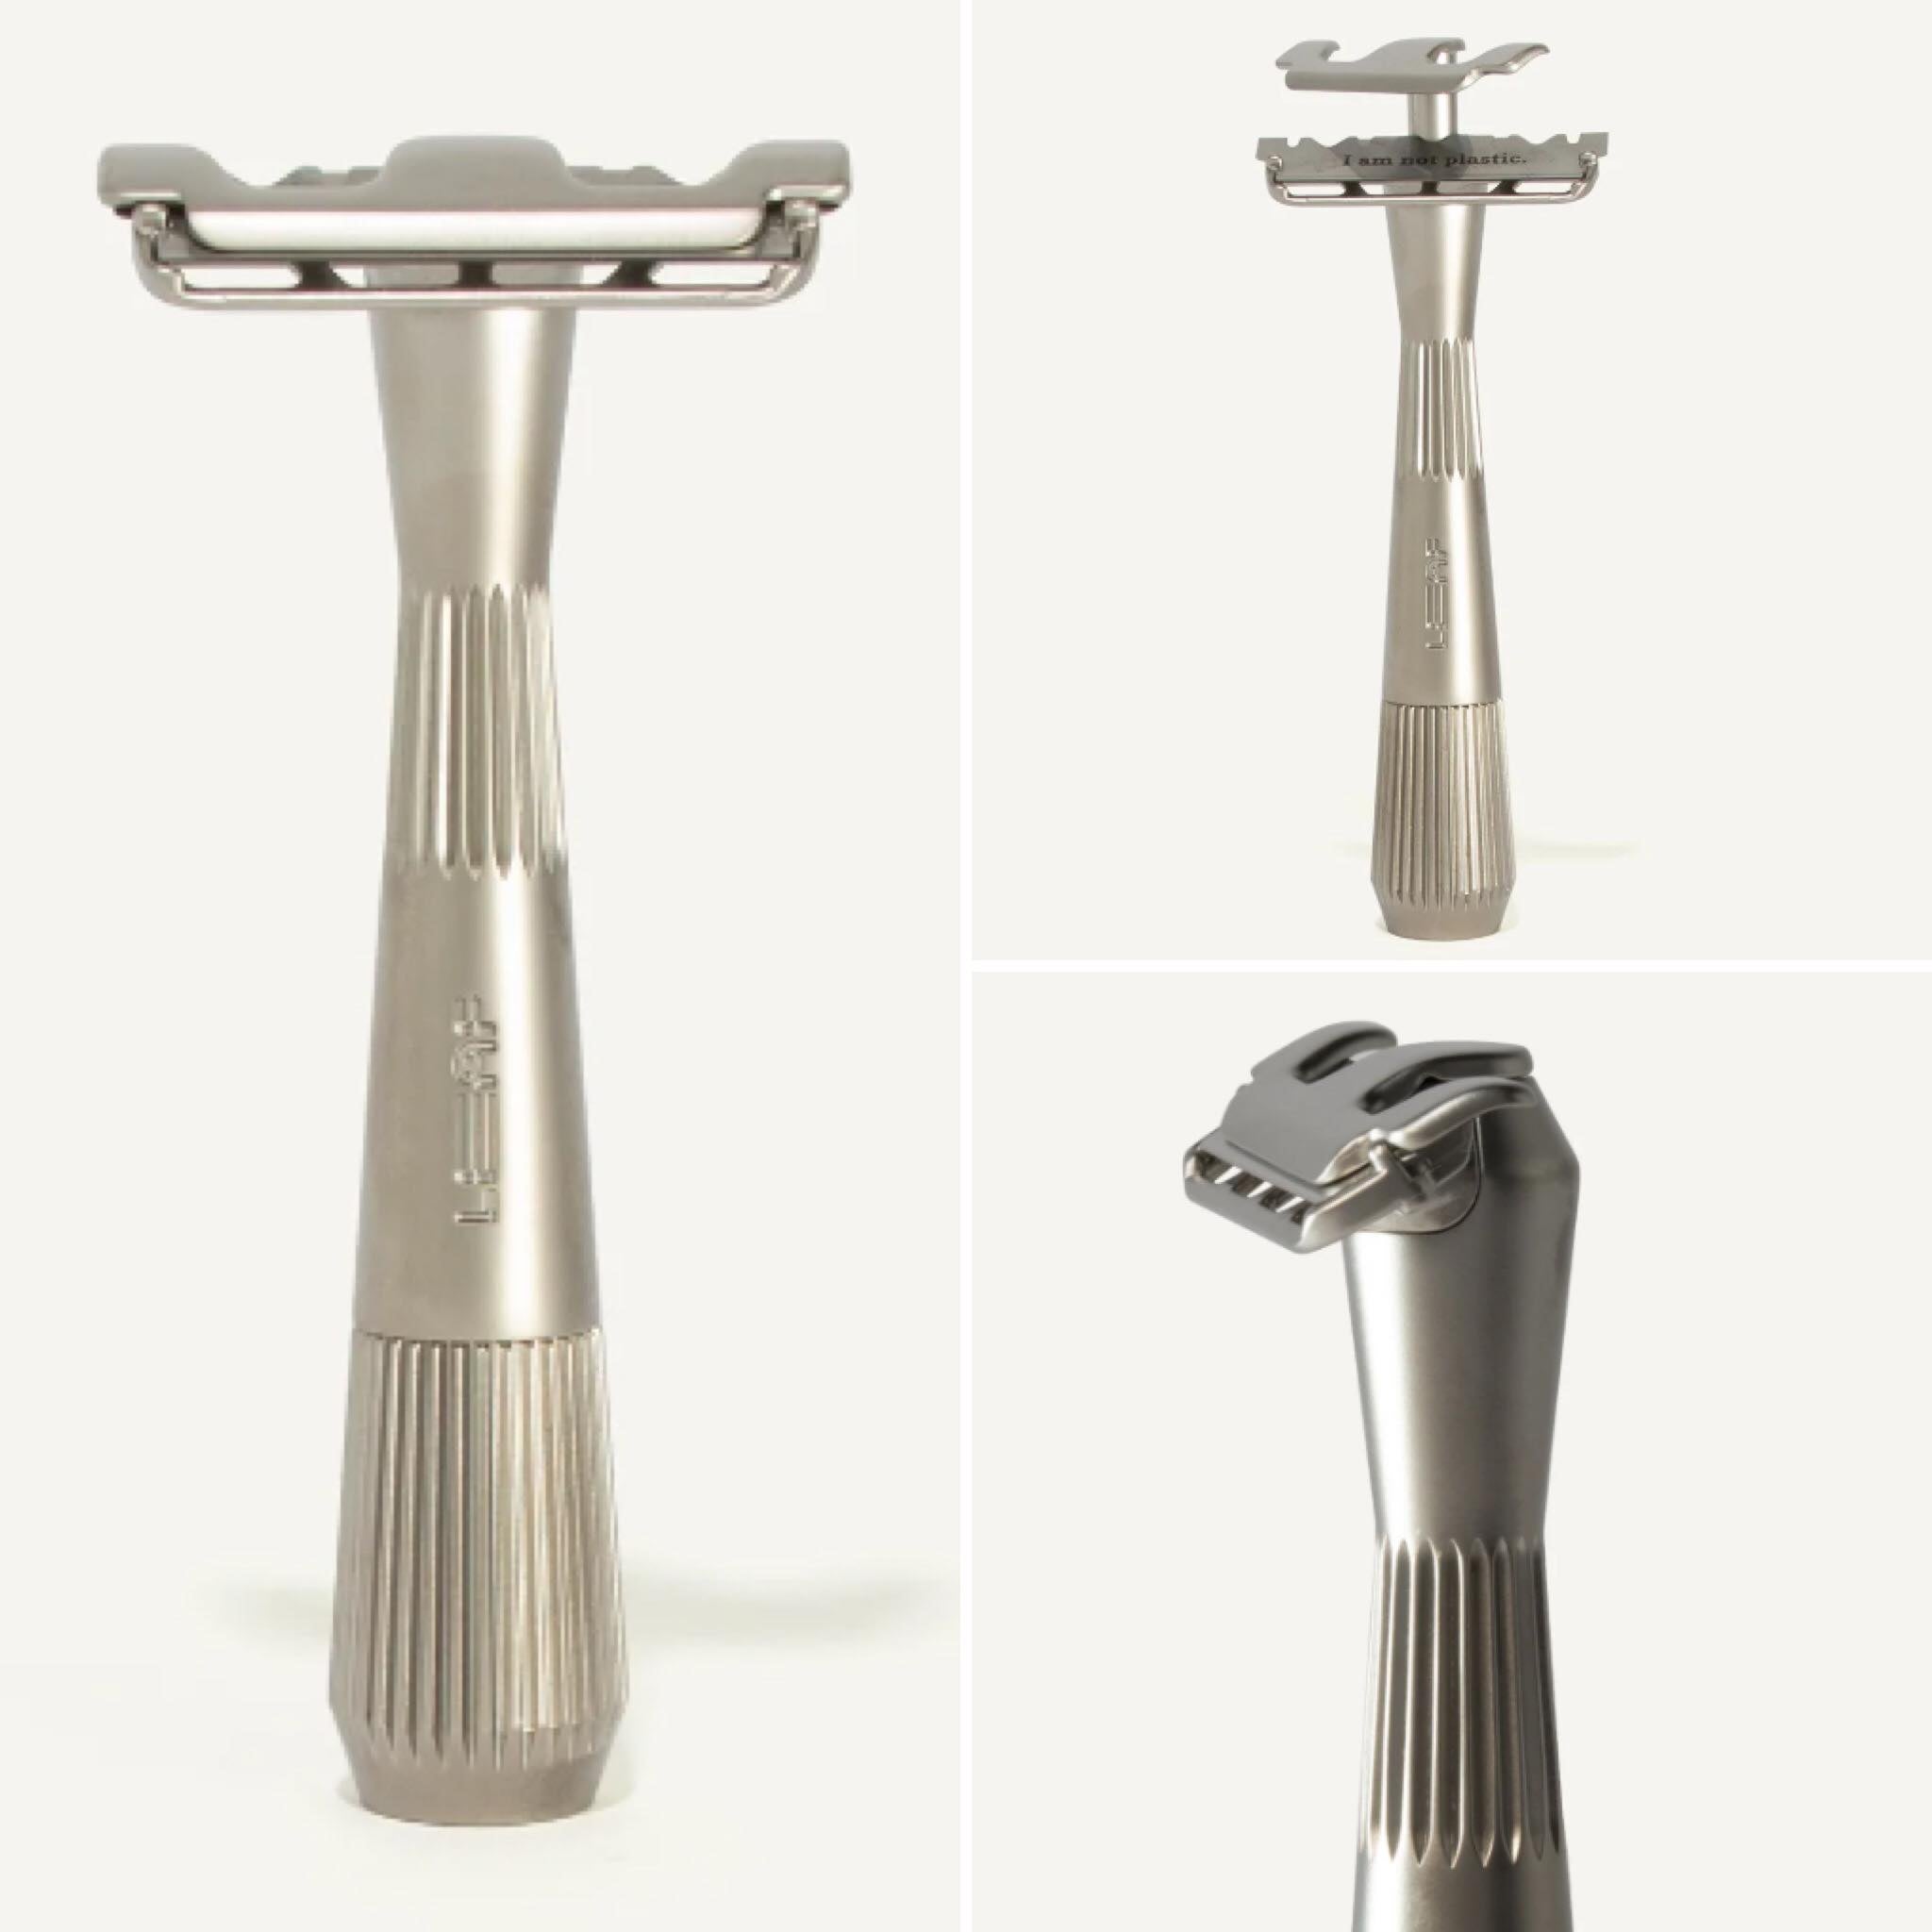 The Twig Razor with a silver finish is a  single edge razor reimagined for sensitive skin, safe-use, and small places.